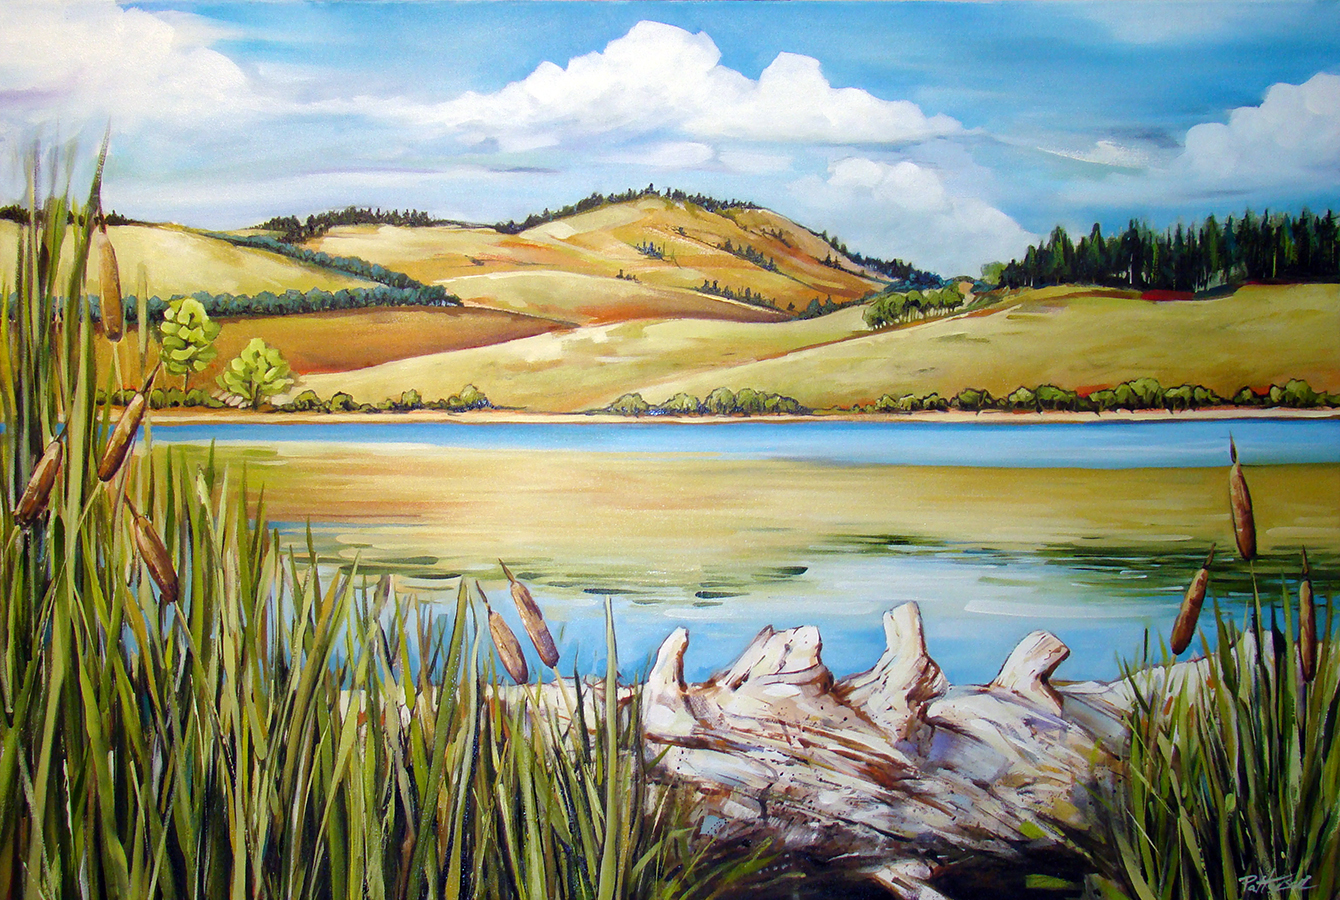 Courtney Lake 24X36 Oil on canvas